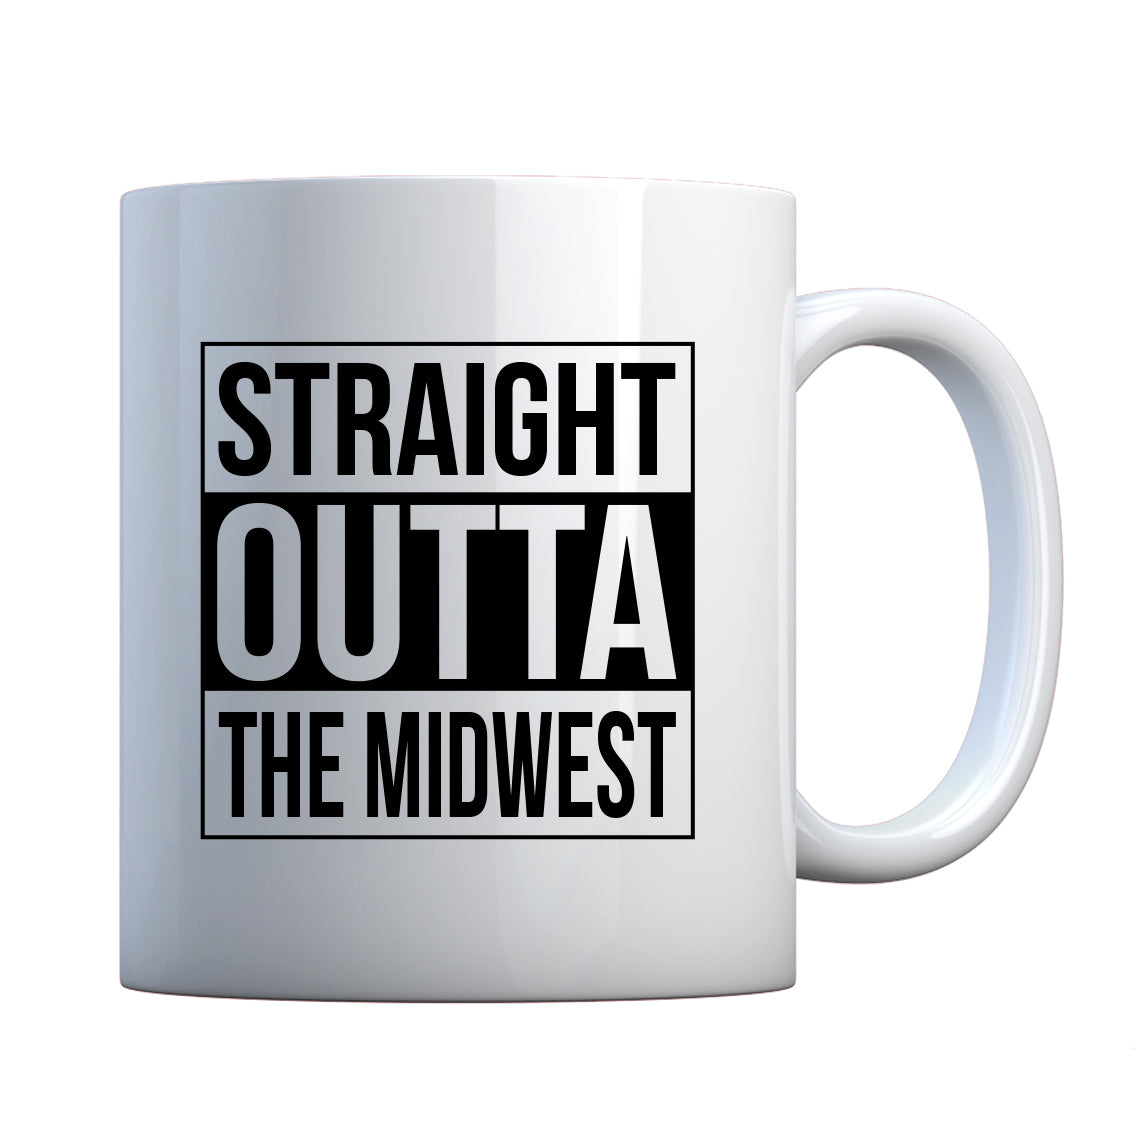 Straight Outta the Midwest Ceramic Gift Mug